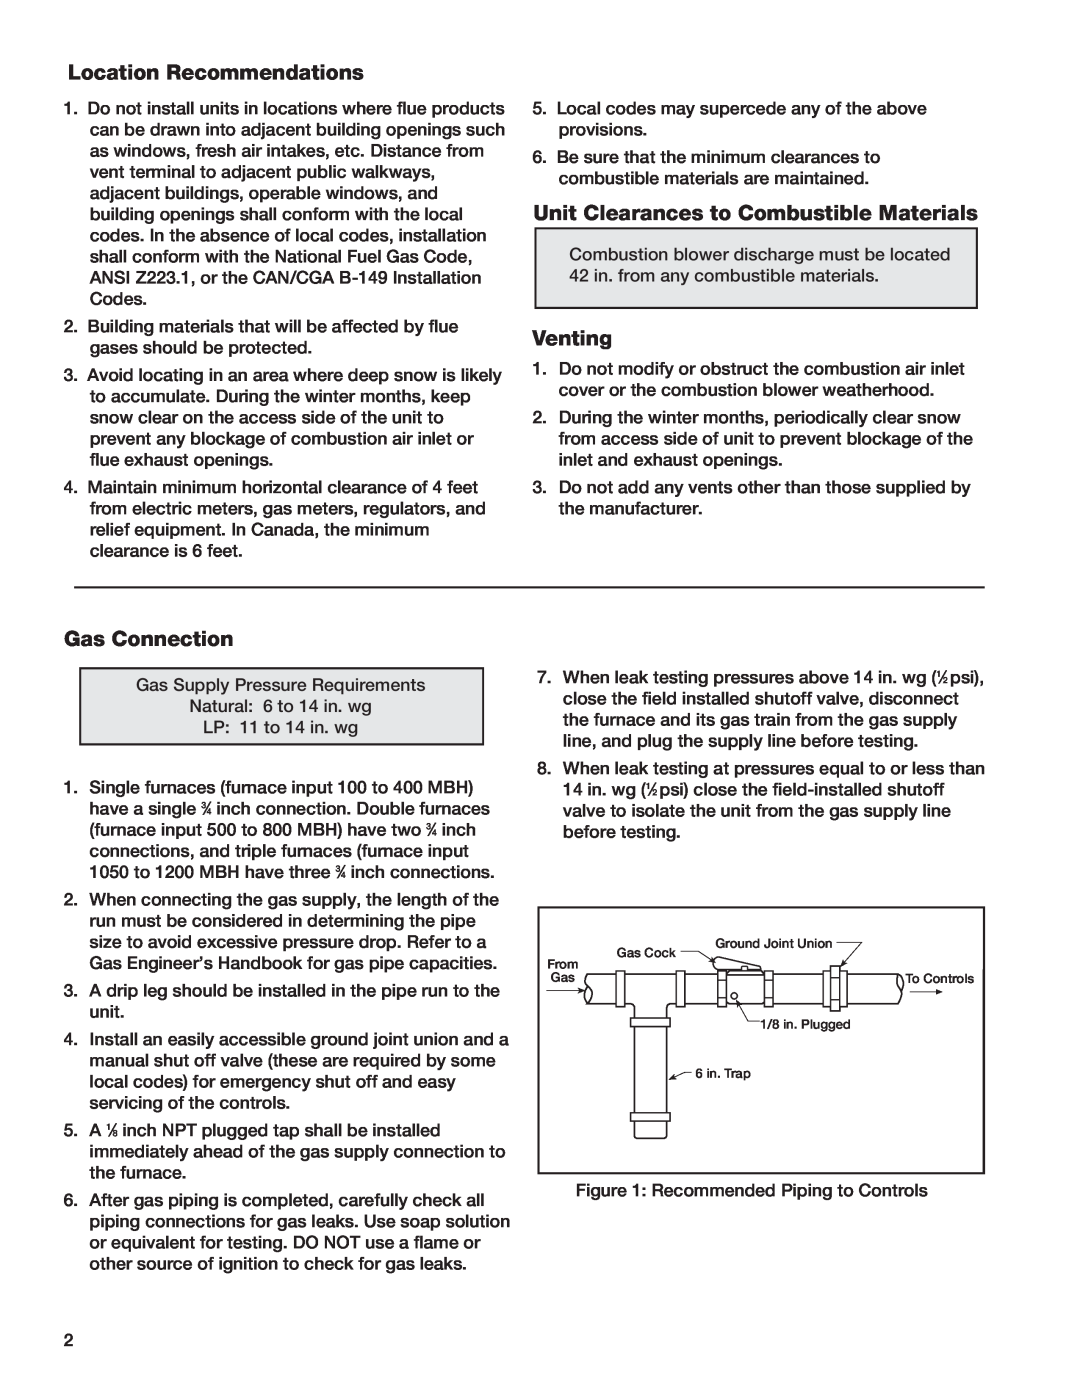 Greenheck Fan PVF manual Location Recommendations, Unit Clearances to Combustible Materials, Venting, Gas Connection 